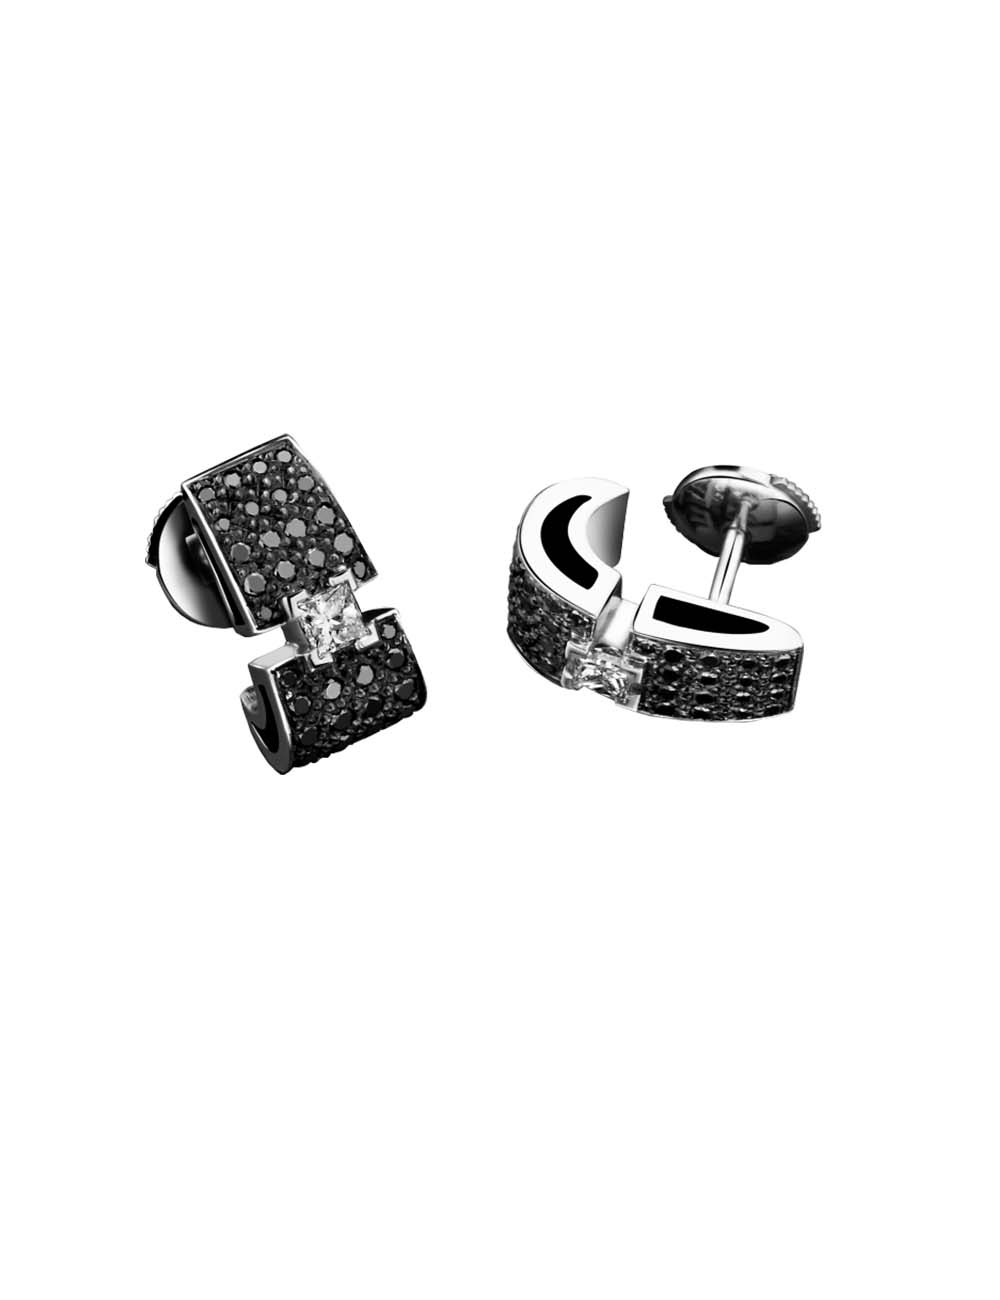 Modern elegance with white gold earrings and white and black diamonds.